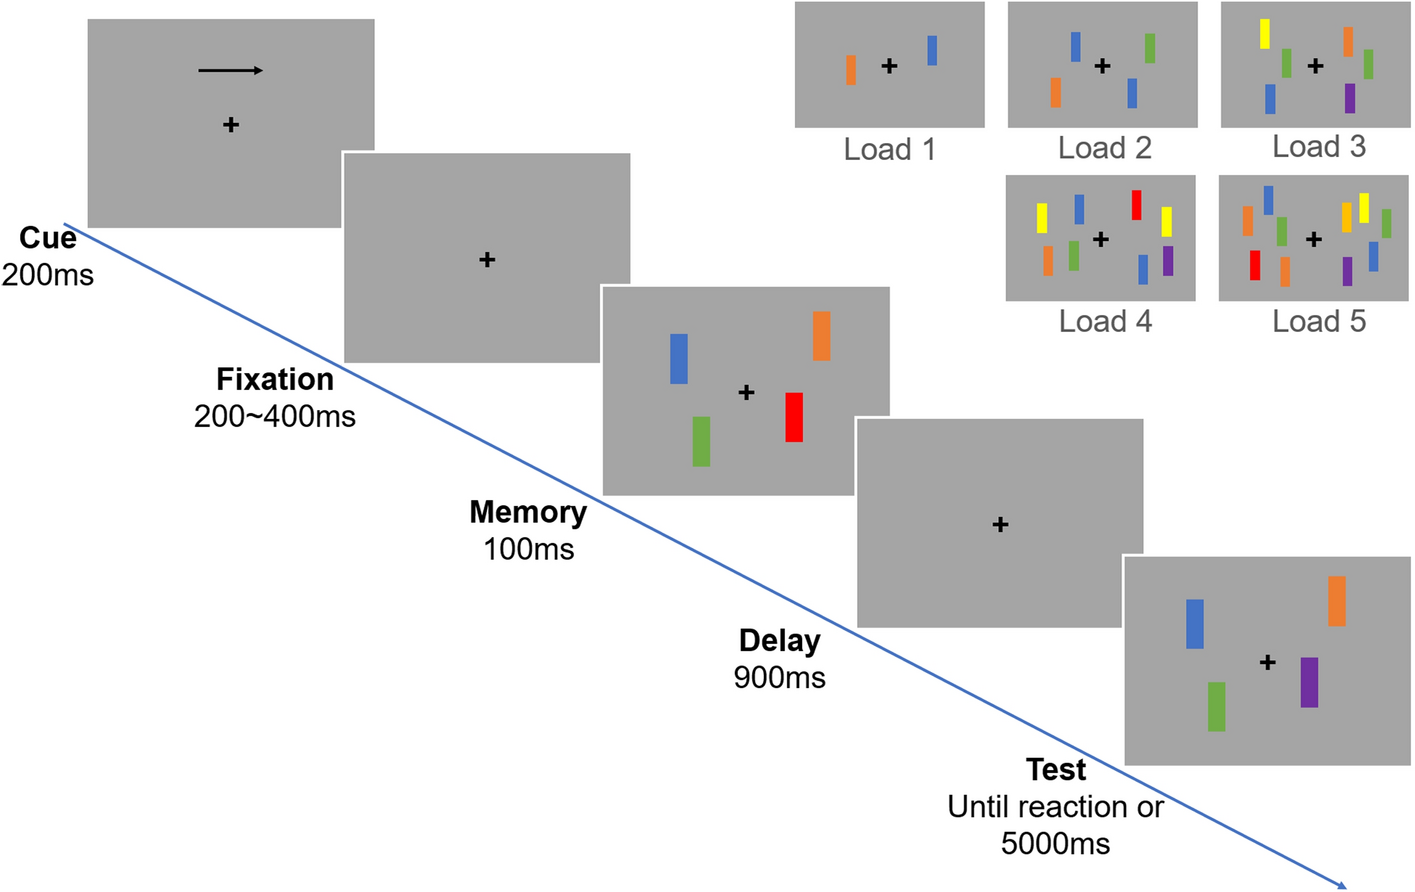 High-altitude exposure leads to increased modularity of brain functional network with the increased occupation of attention resources in early processing of visual working memory